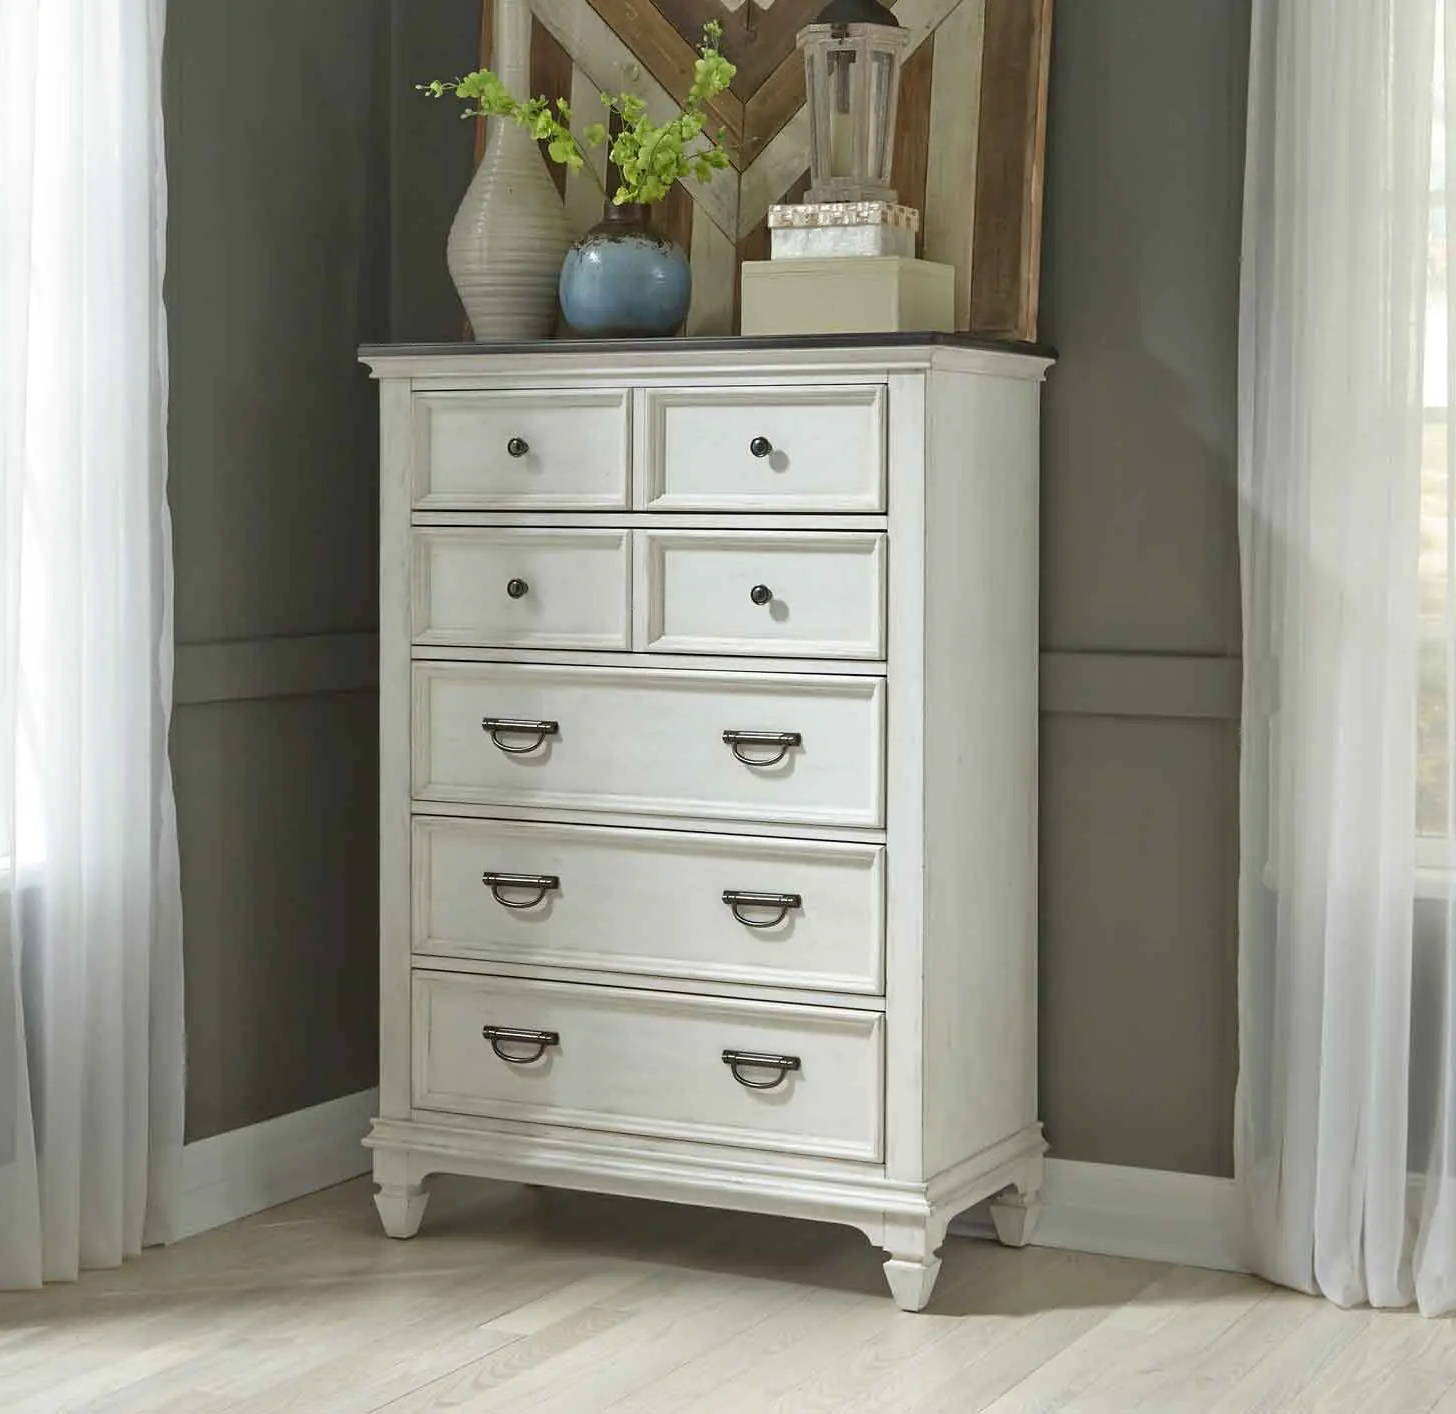 The Allyson Park Bedroom Group Product Review